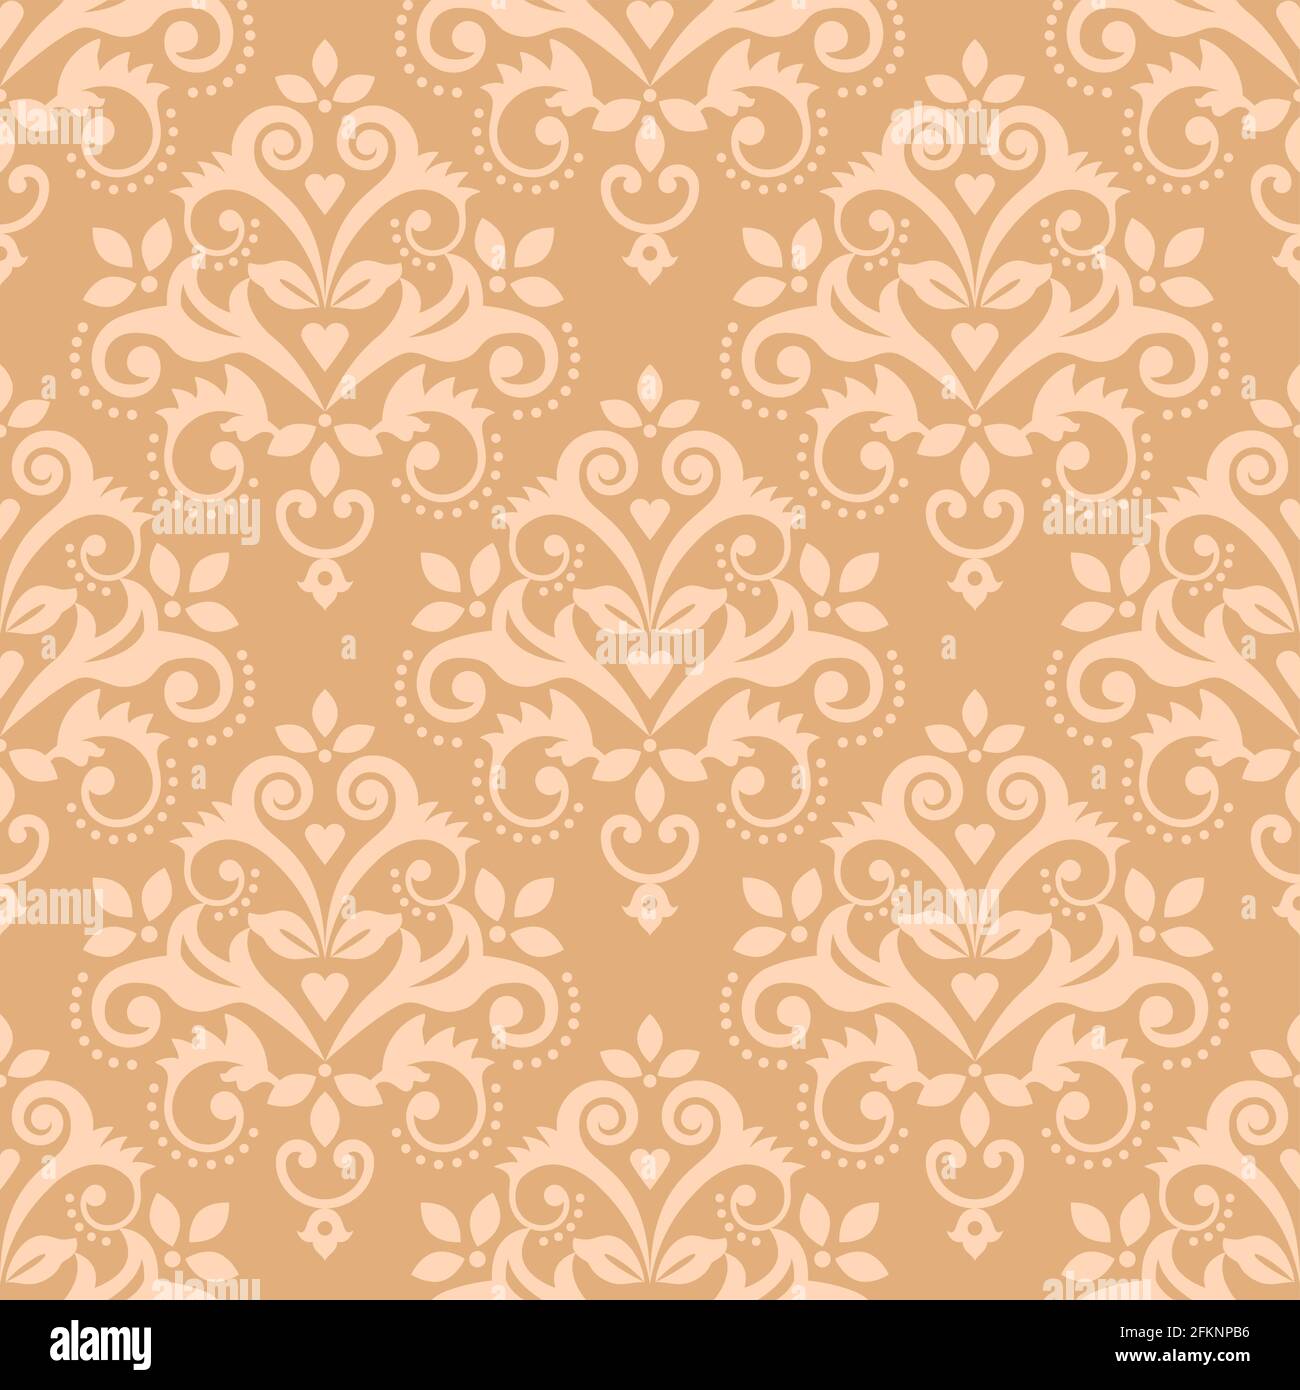 Damask tiled classic wallpaper, textile or fabric print pattern, traditional vector design with floral motif Stock Vector